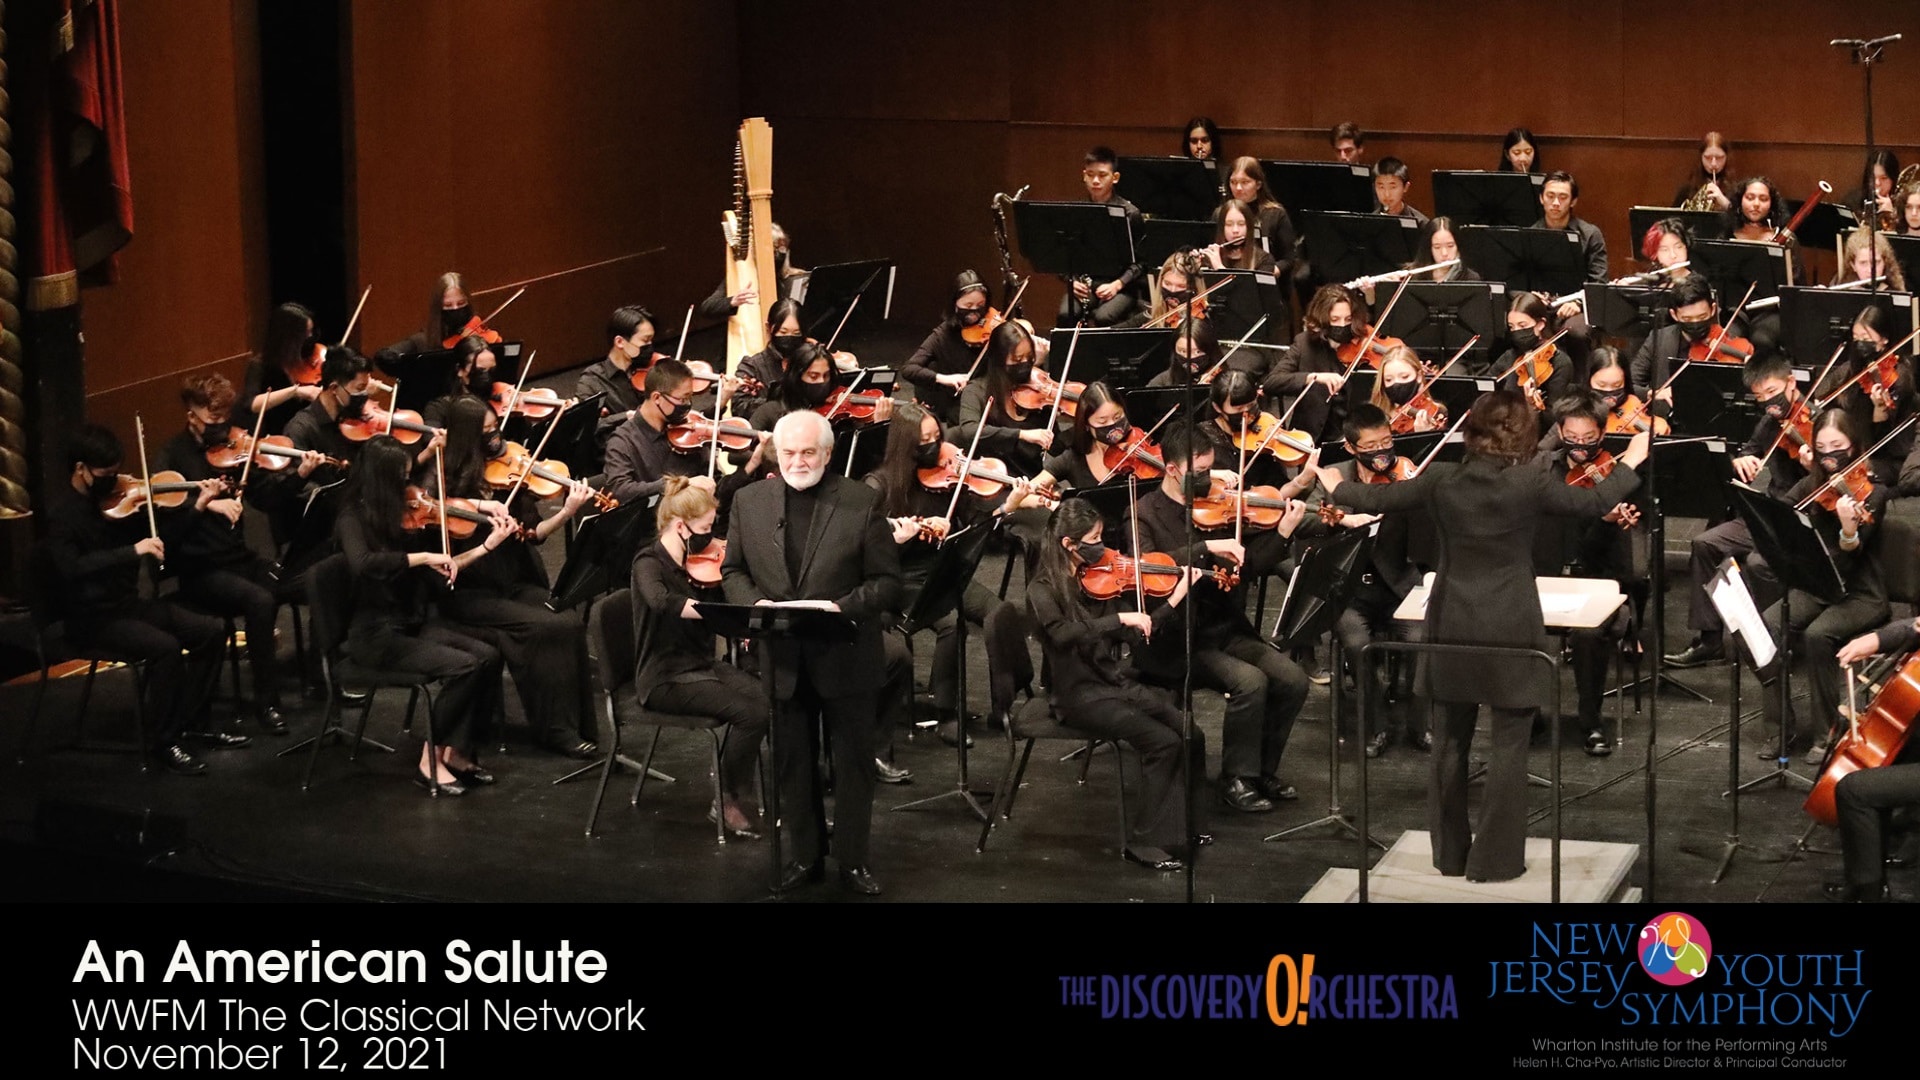 An American Salute performance with Maestro Maull & Maestro Helen Cha-Pyo with the New Jersey Symphony Orchestra